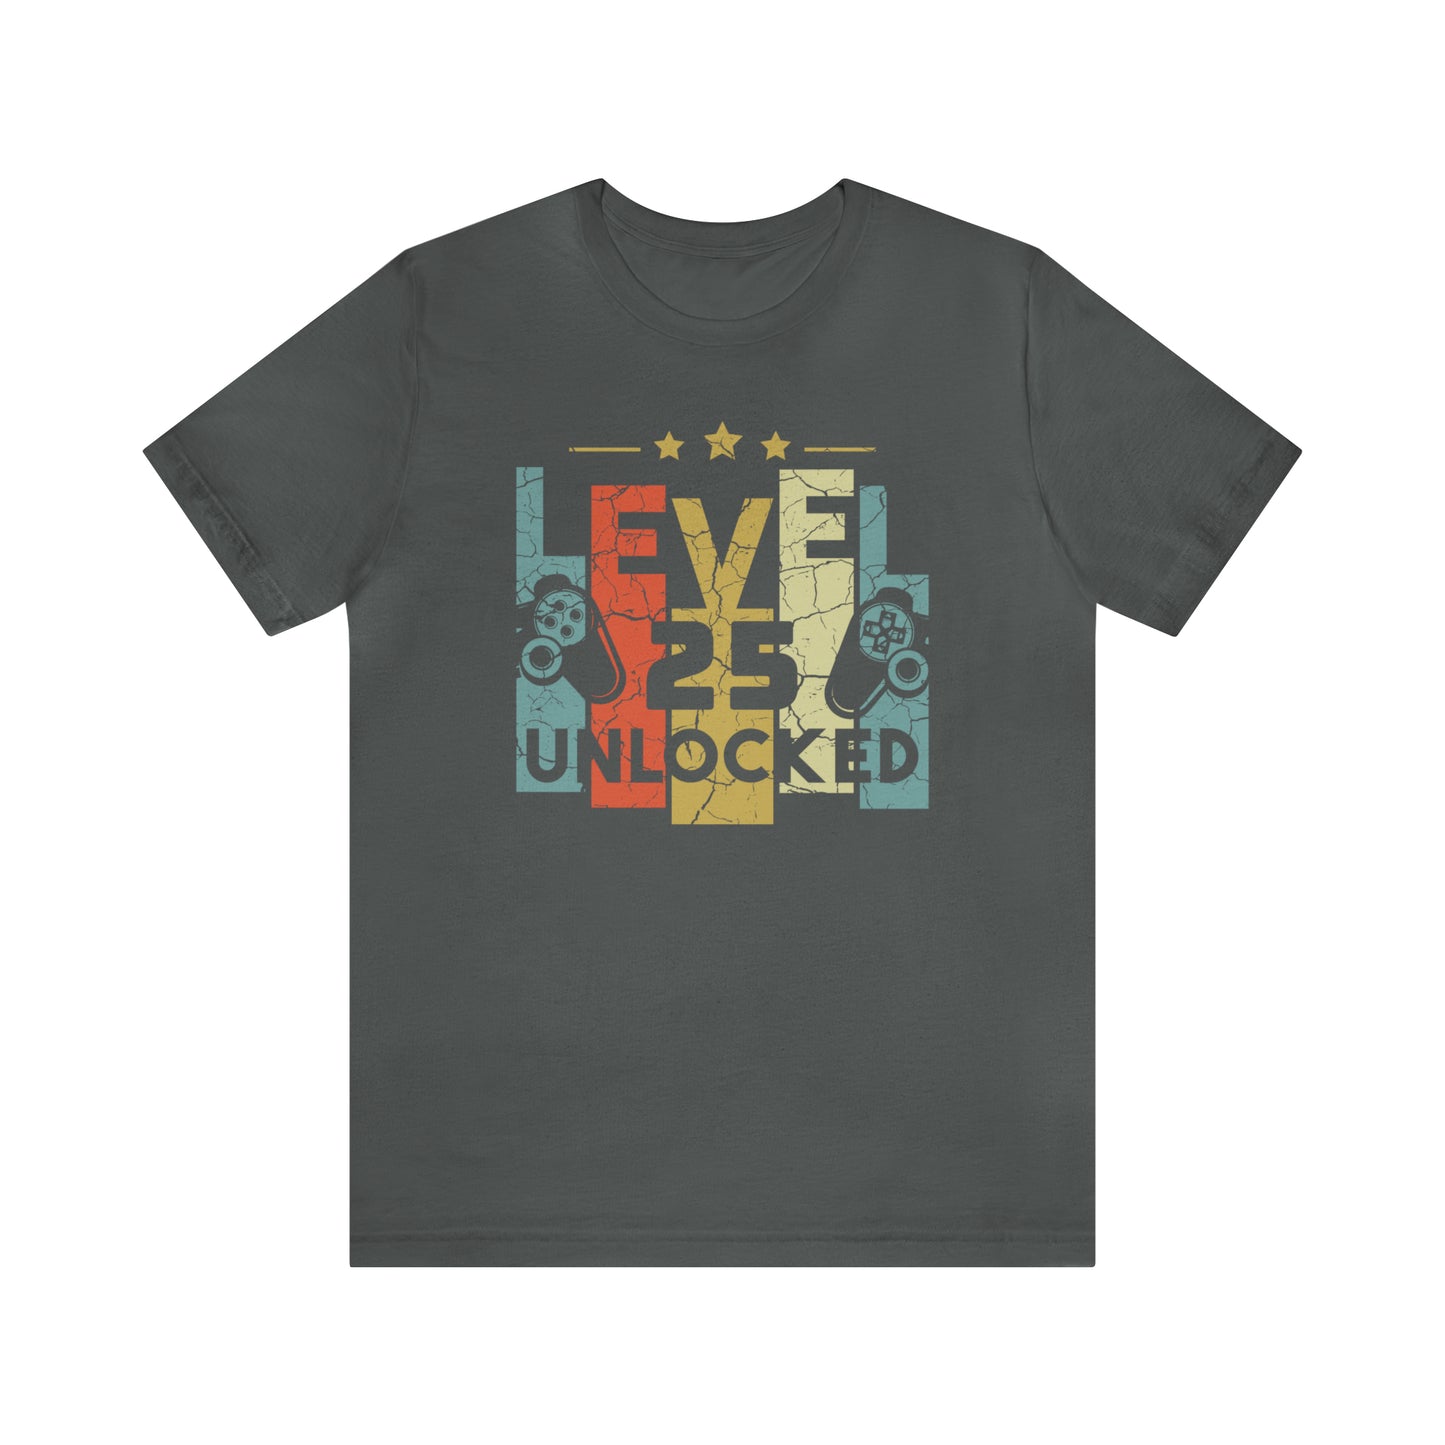 25th Birthday Gift for son or daughter, Level 25 Unlocked Funny Gamer Shirt for boy or nephew